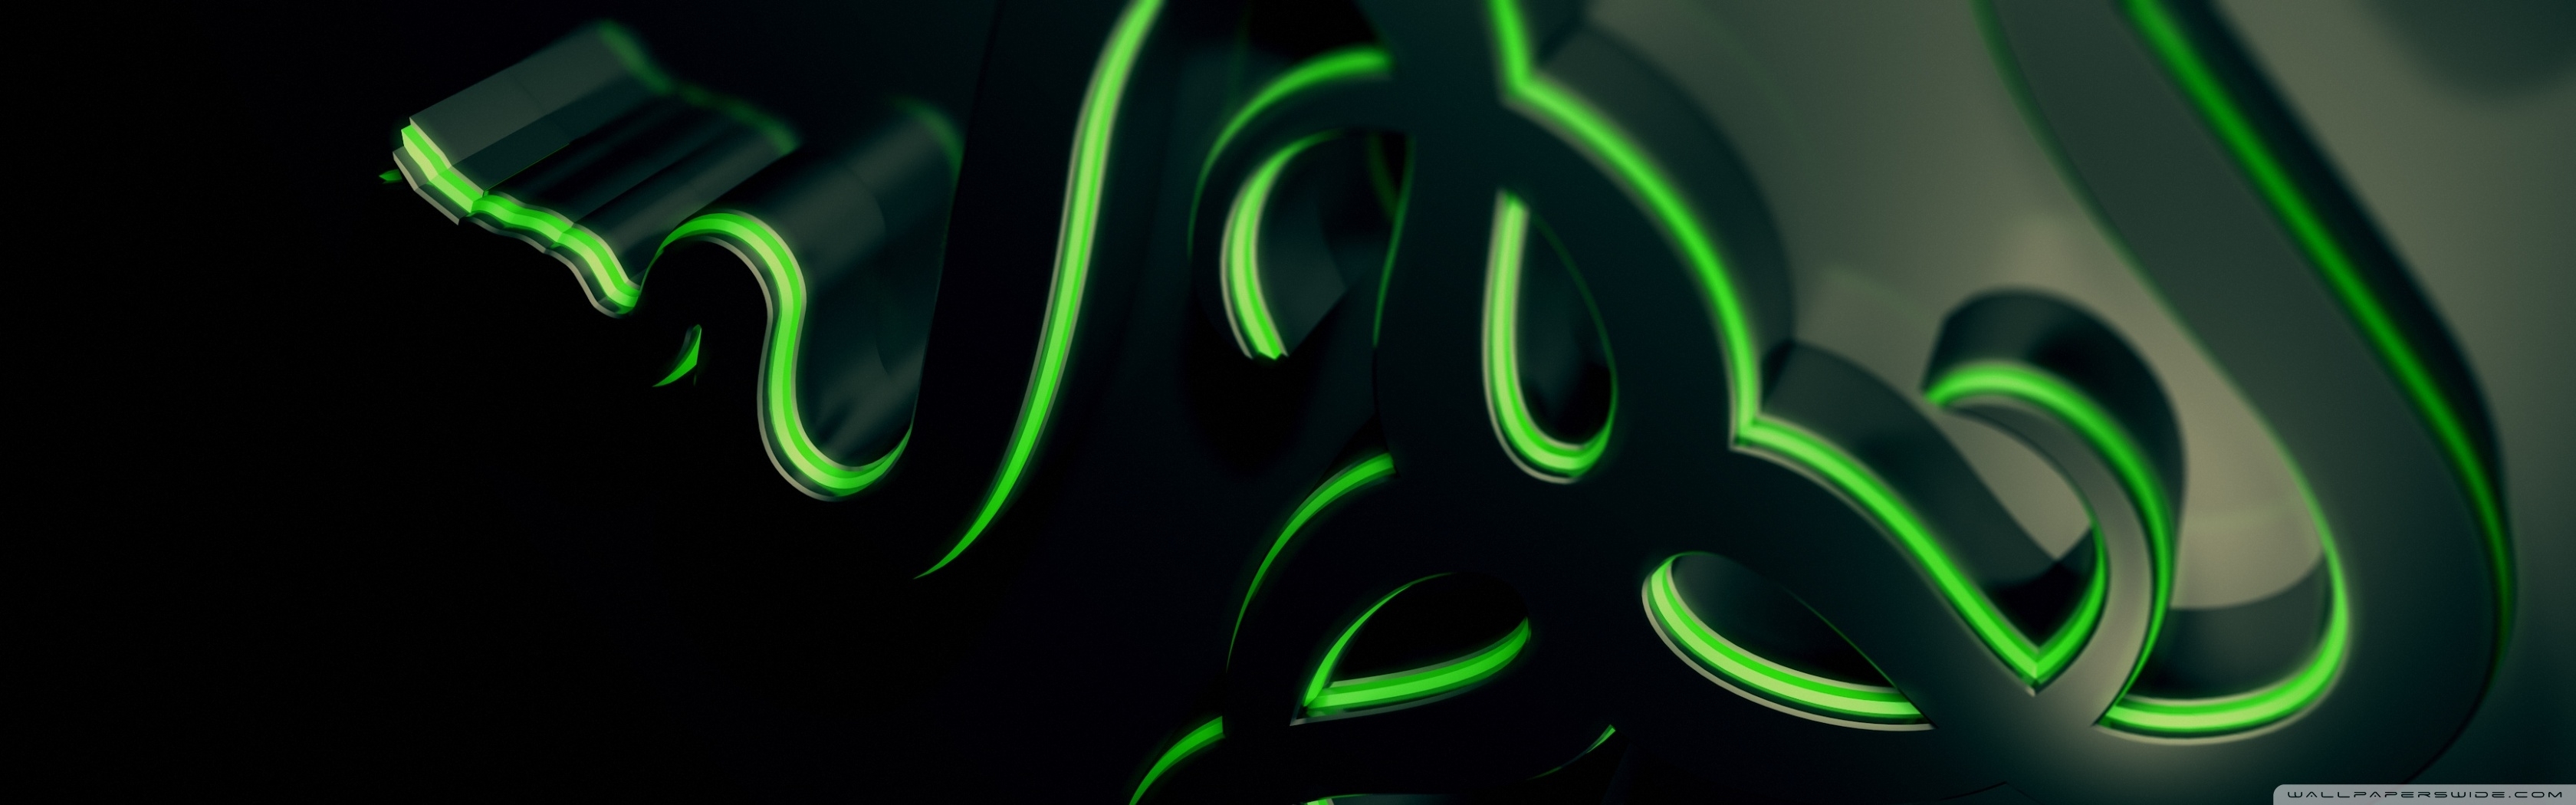 10 Most Popular Razer Dual Monitor Wallpaper FULL HD 1920×1080 For PC Background